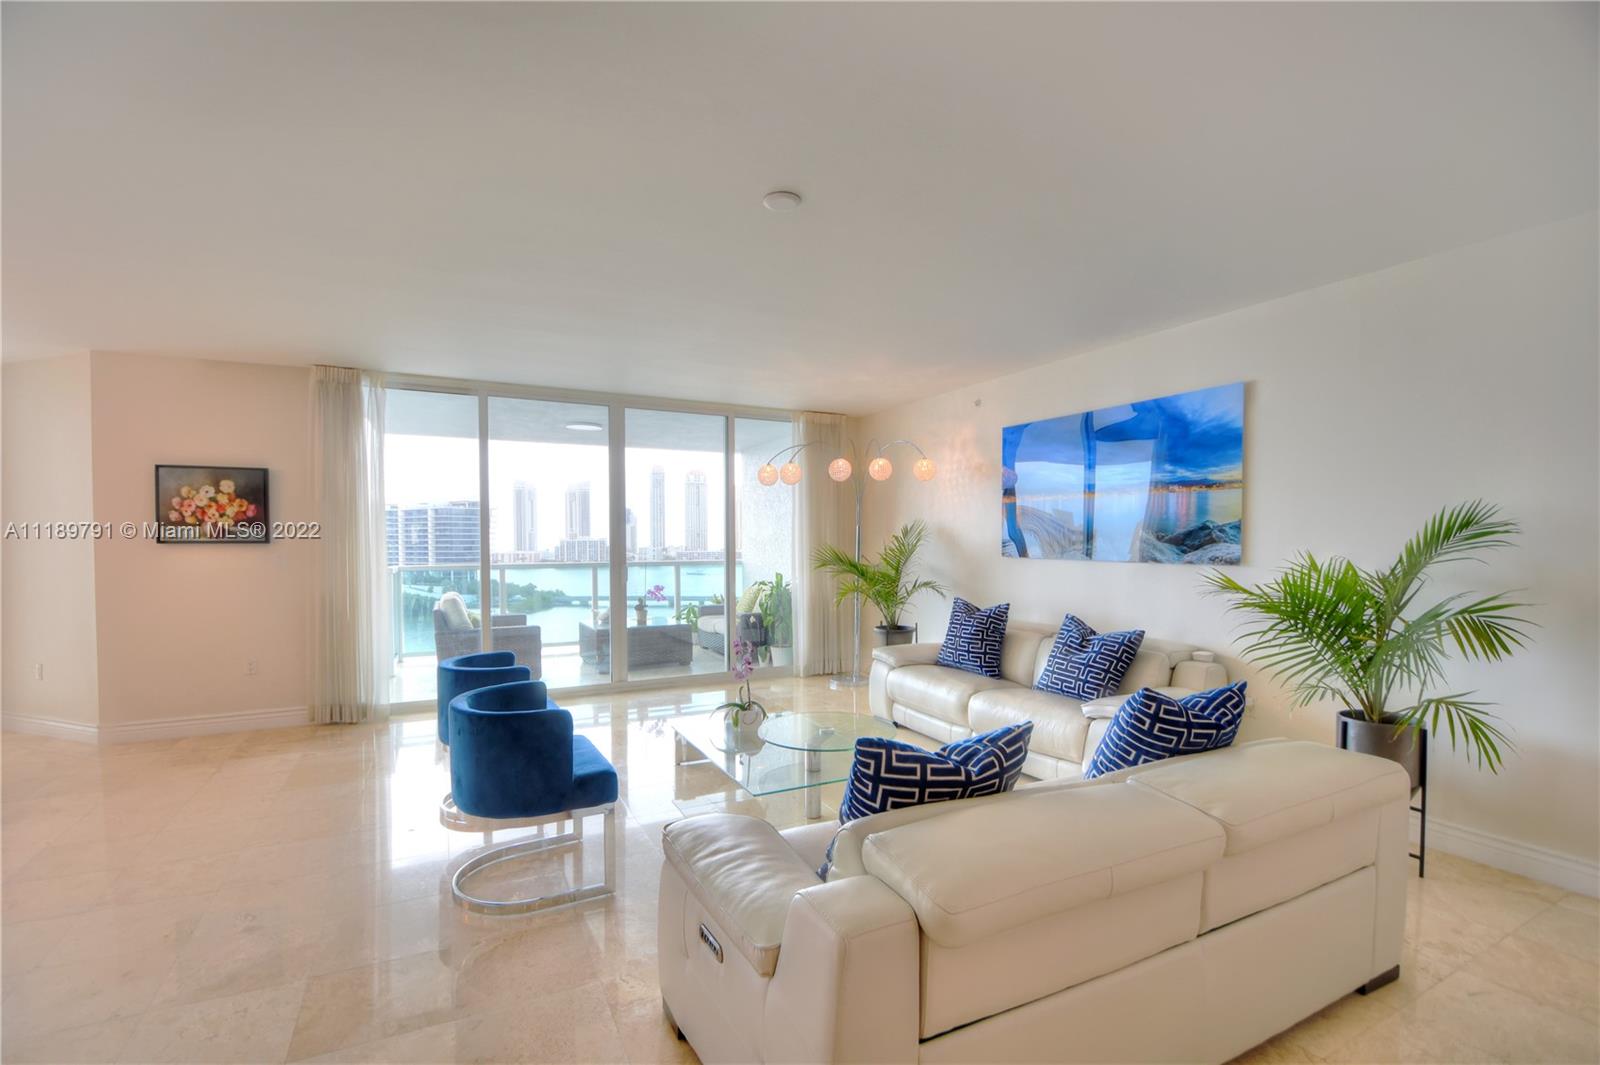 BEAUTIFUL UNIT !!Stunning direct views of Bay, Ocean & Sunny Isles' skyline to the East & amazing city views to the West from this 3 Bed + Media Room / 3.5 Baths. Flow-through apartment in the Luxury Peninsula One. A private elevator opens right into the unit, marble floors in the common area, Kitchen w/granite tops, Sub-Zero frig, Utility room with washer & dryer, state-of-the-art security, and concierge! This is a buyer's dream home!